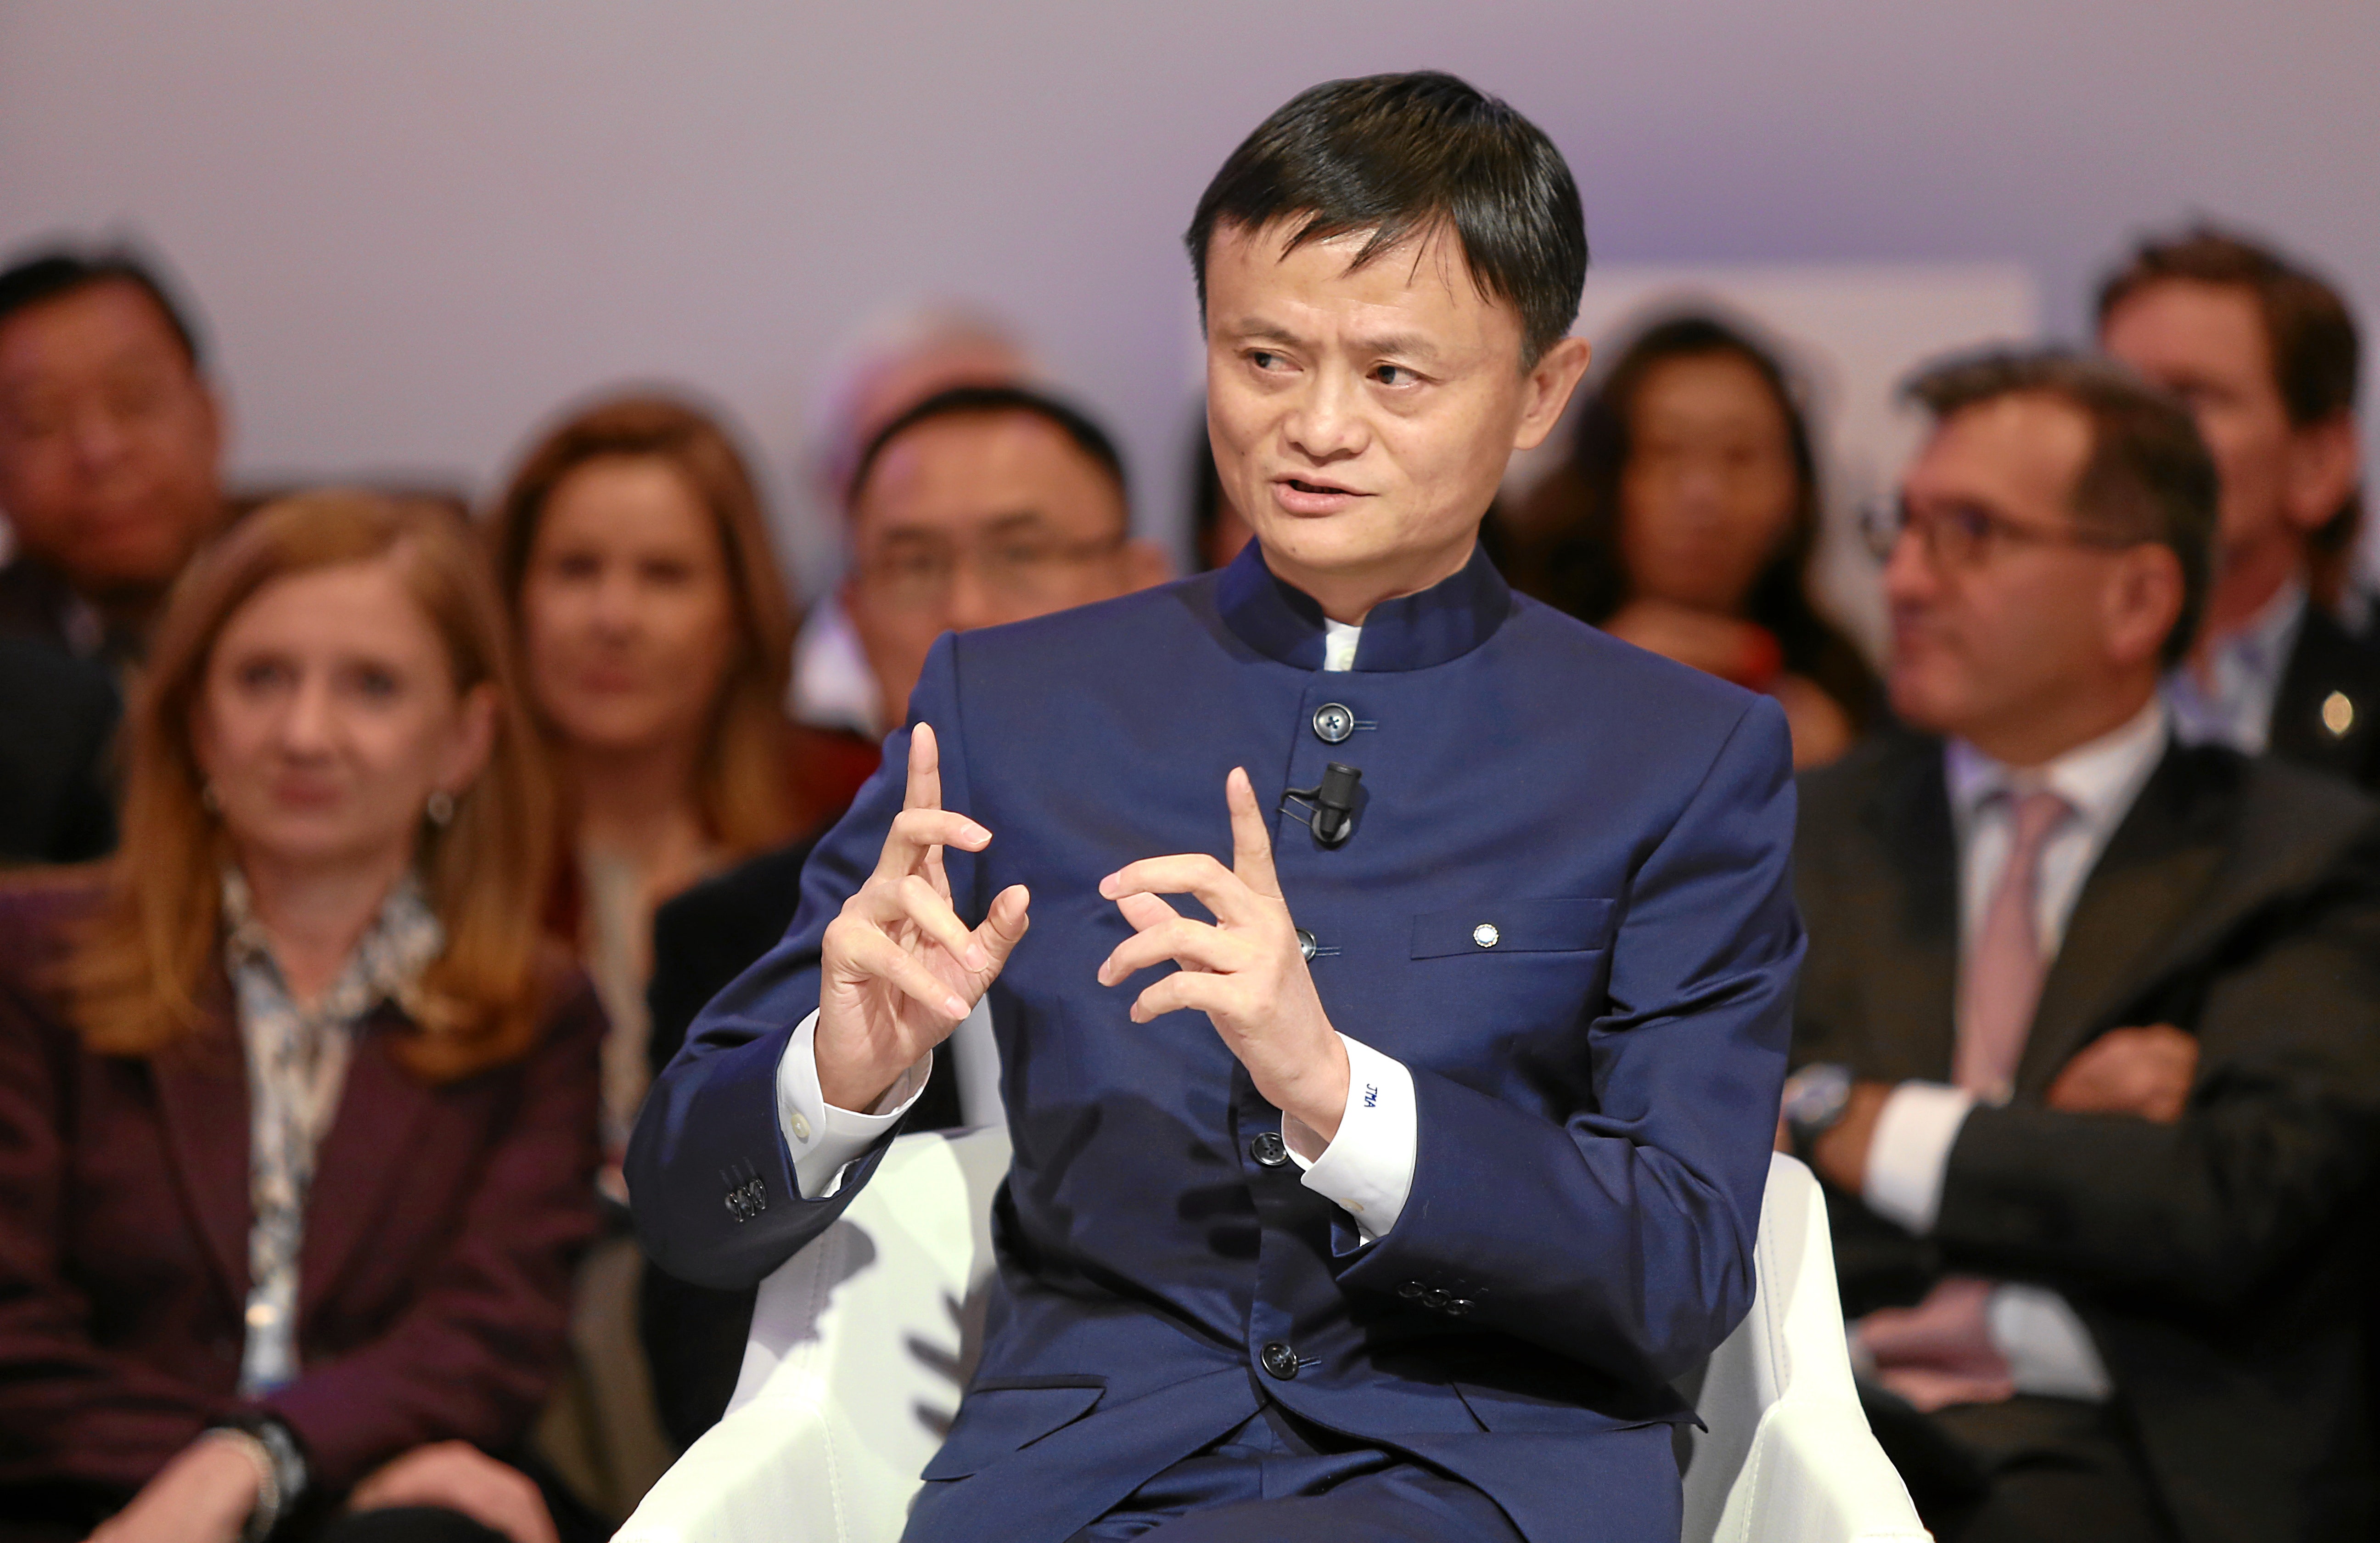 Jack Ma Gets Summoned By Chinese Regulators Ahead Of Ant Group's IPO